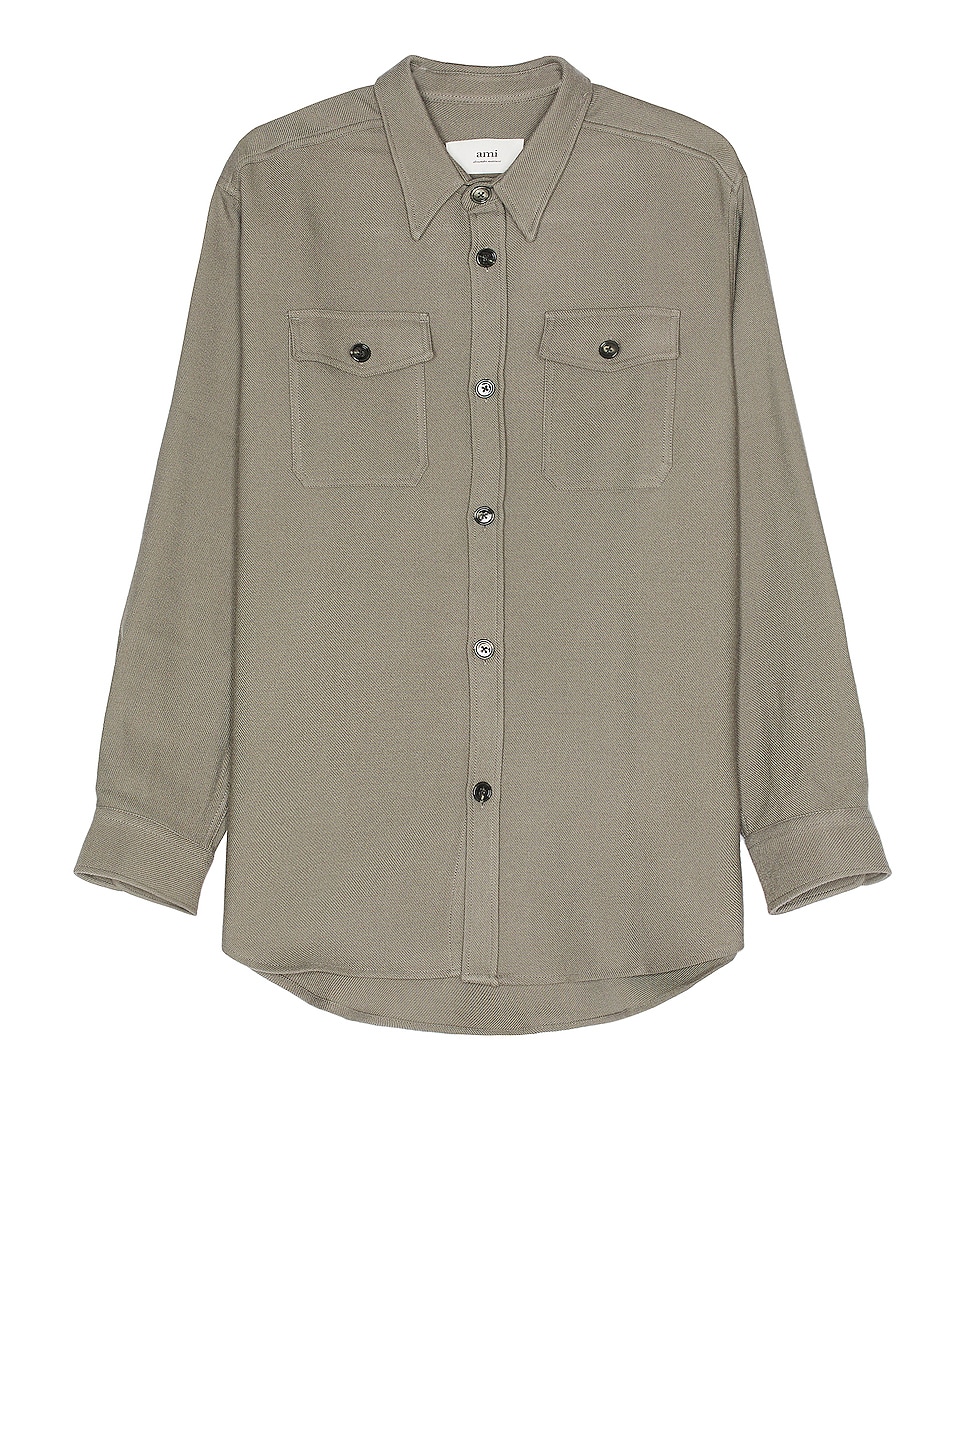 Image 1 of ami Overshirt in Taupe